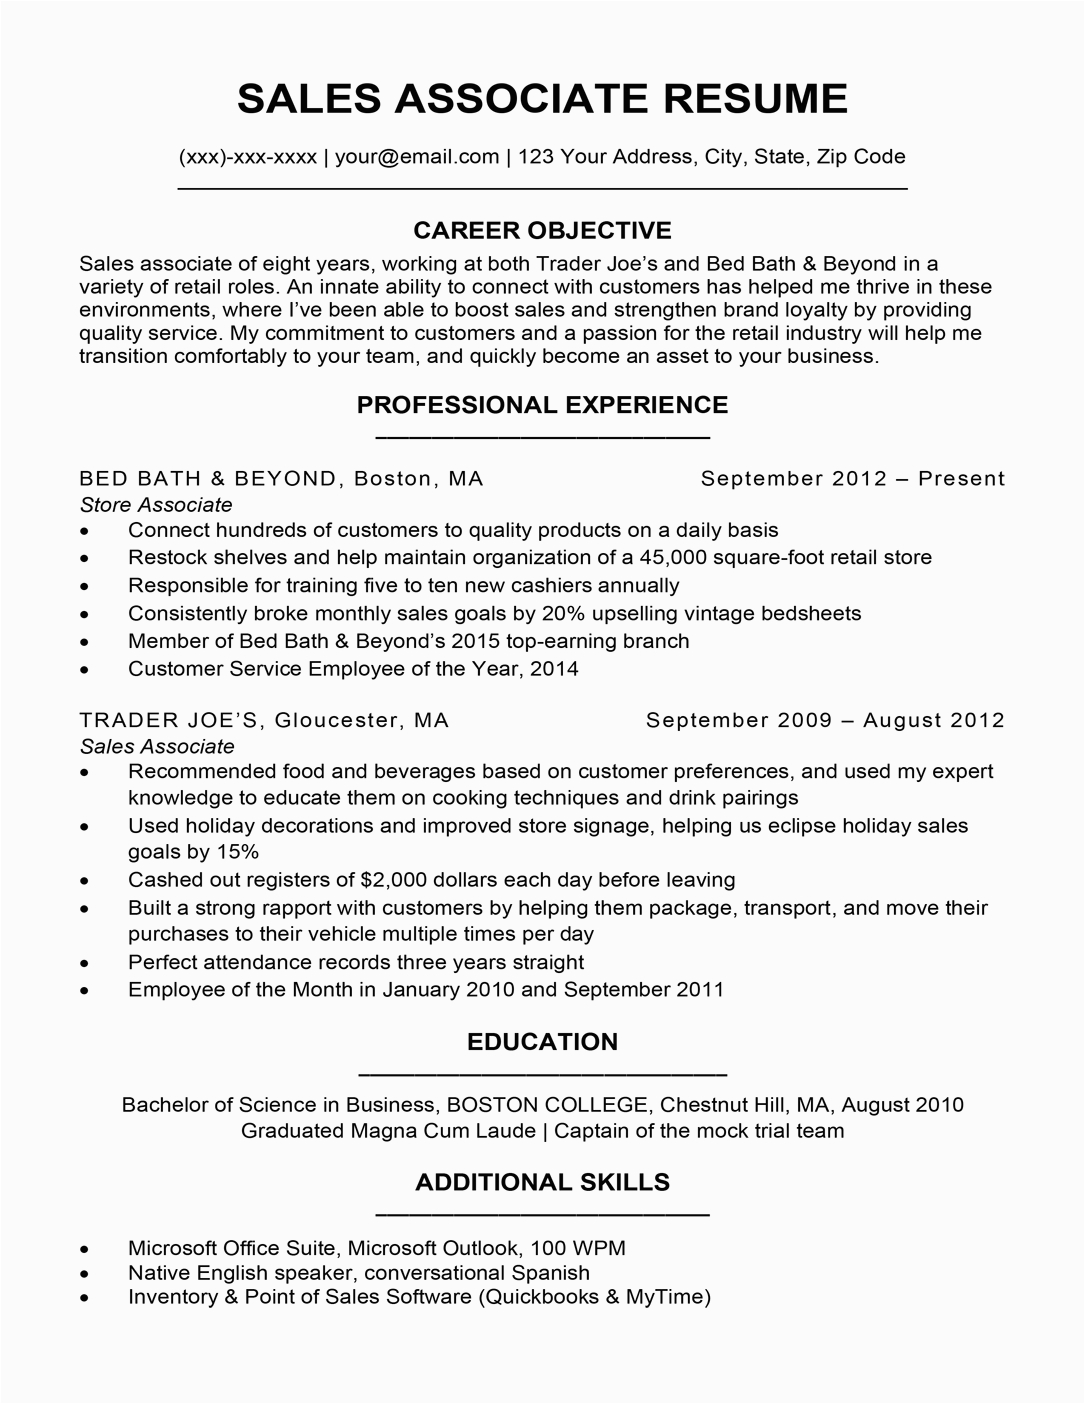 Sample Resume for Sales associate with Experience Sales associate Resume Sample & Writing Tips